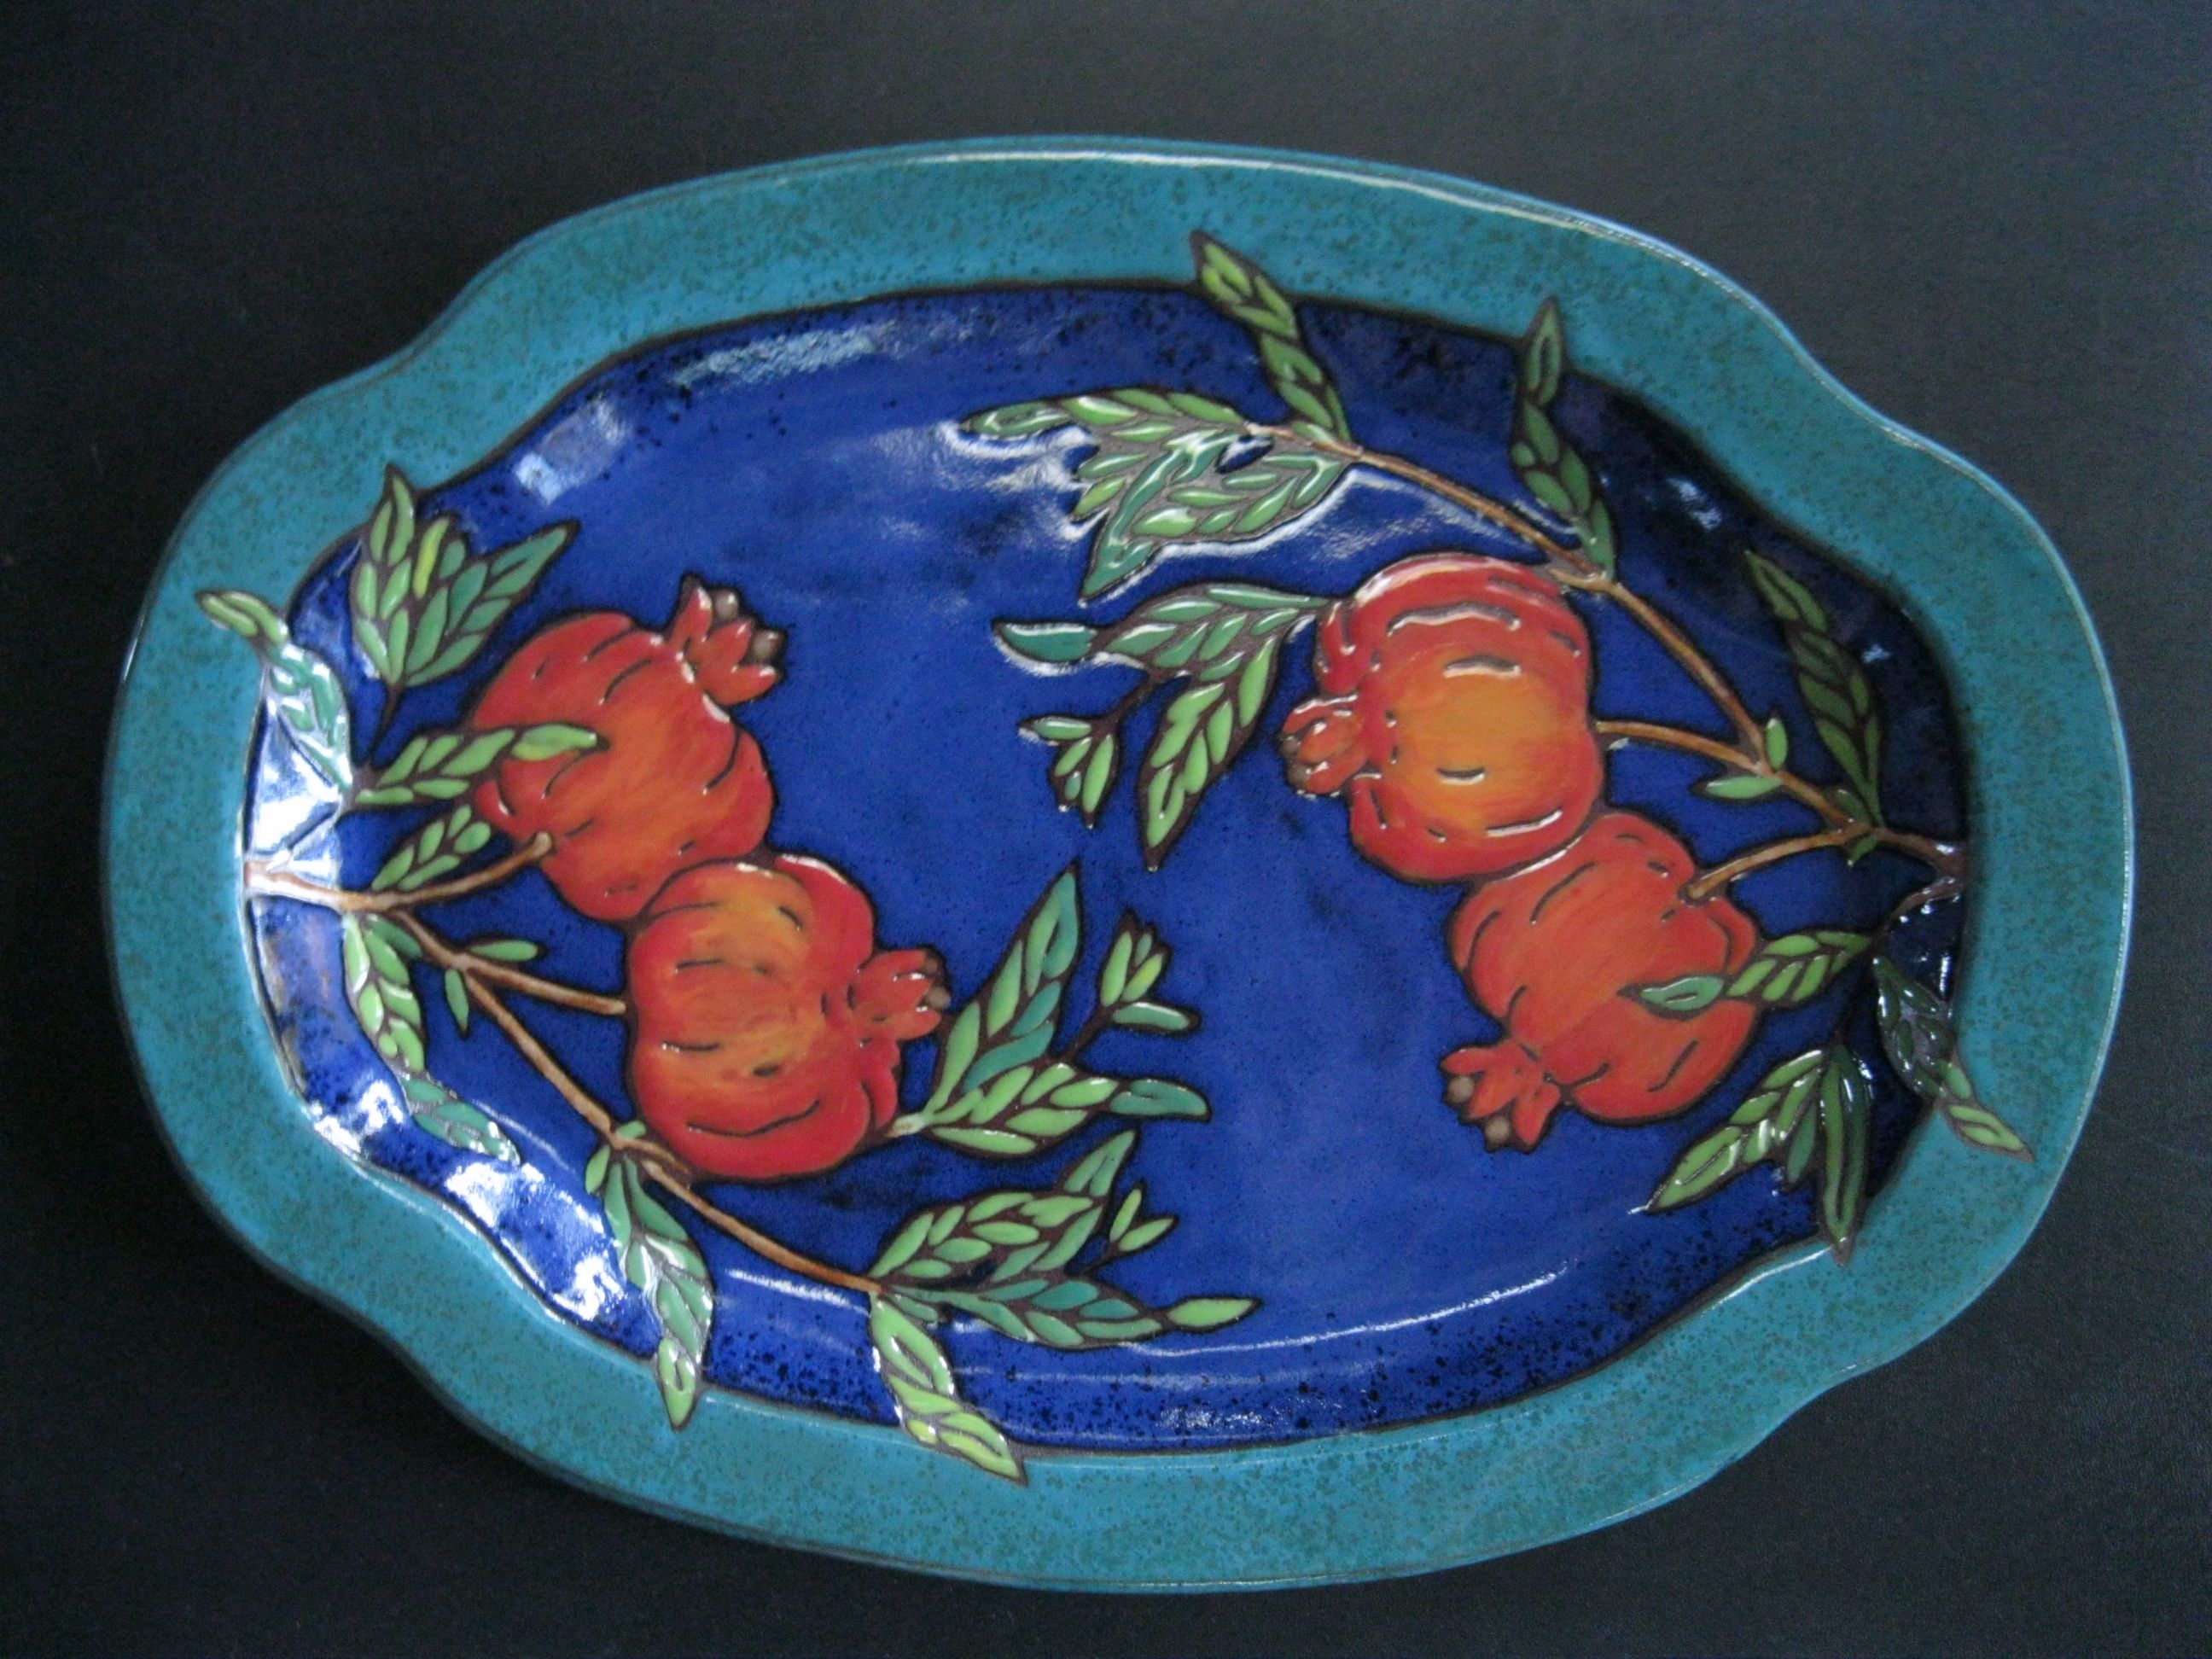 Cobalt Blue and Turquoise Platter with pomegranate design